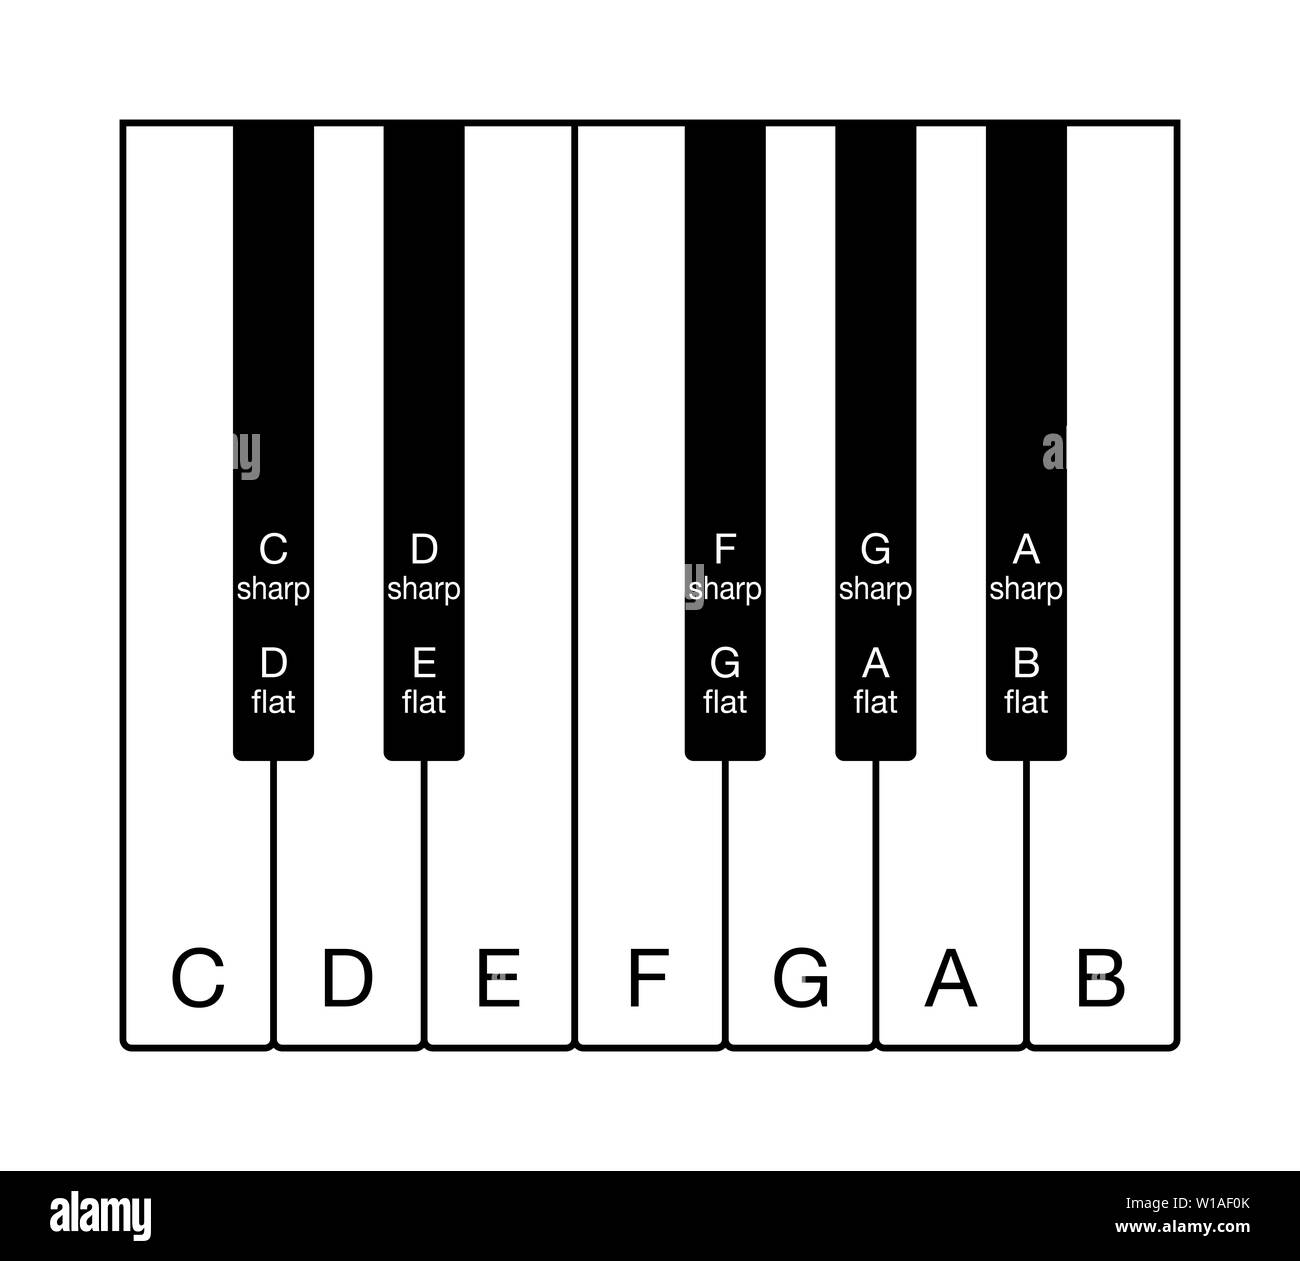 https://c8.alamy.com/comp/W1AF0K/twelve-tone-chromatic-scale-on-a-keyboard-one-octave-of-notes-of-the-western-musical-scale-twelve-keys-from-c-to-b-with-note-names-in-english-W1AF0K.jpg